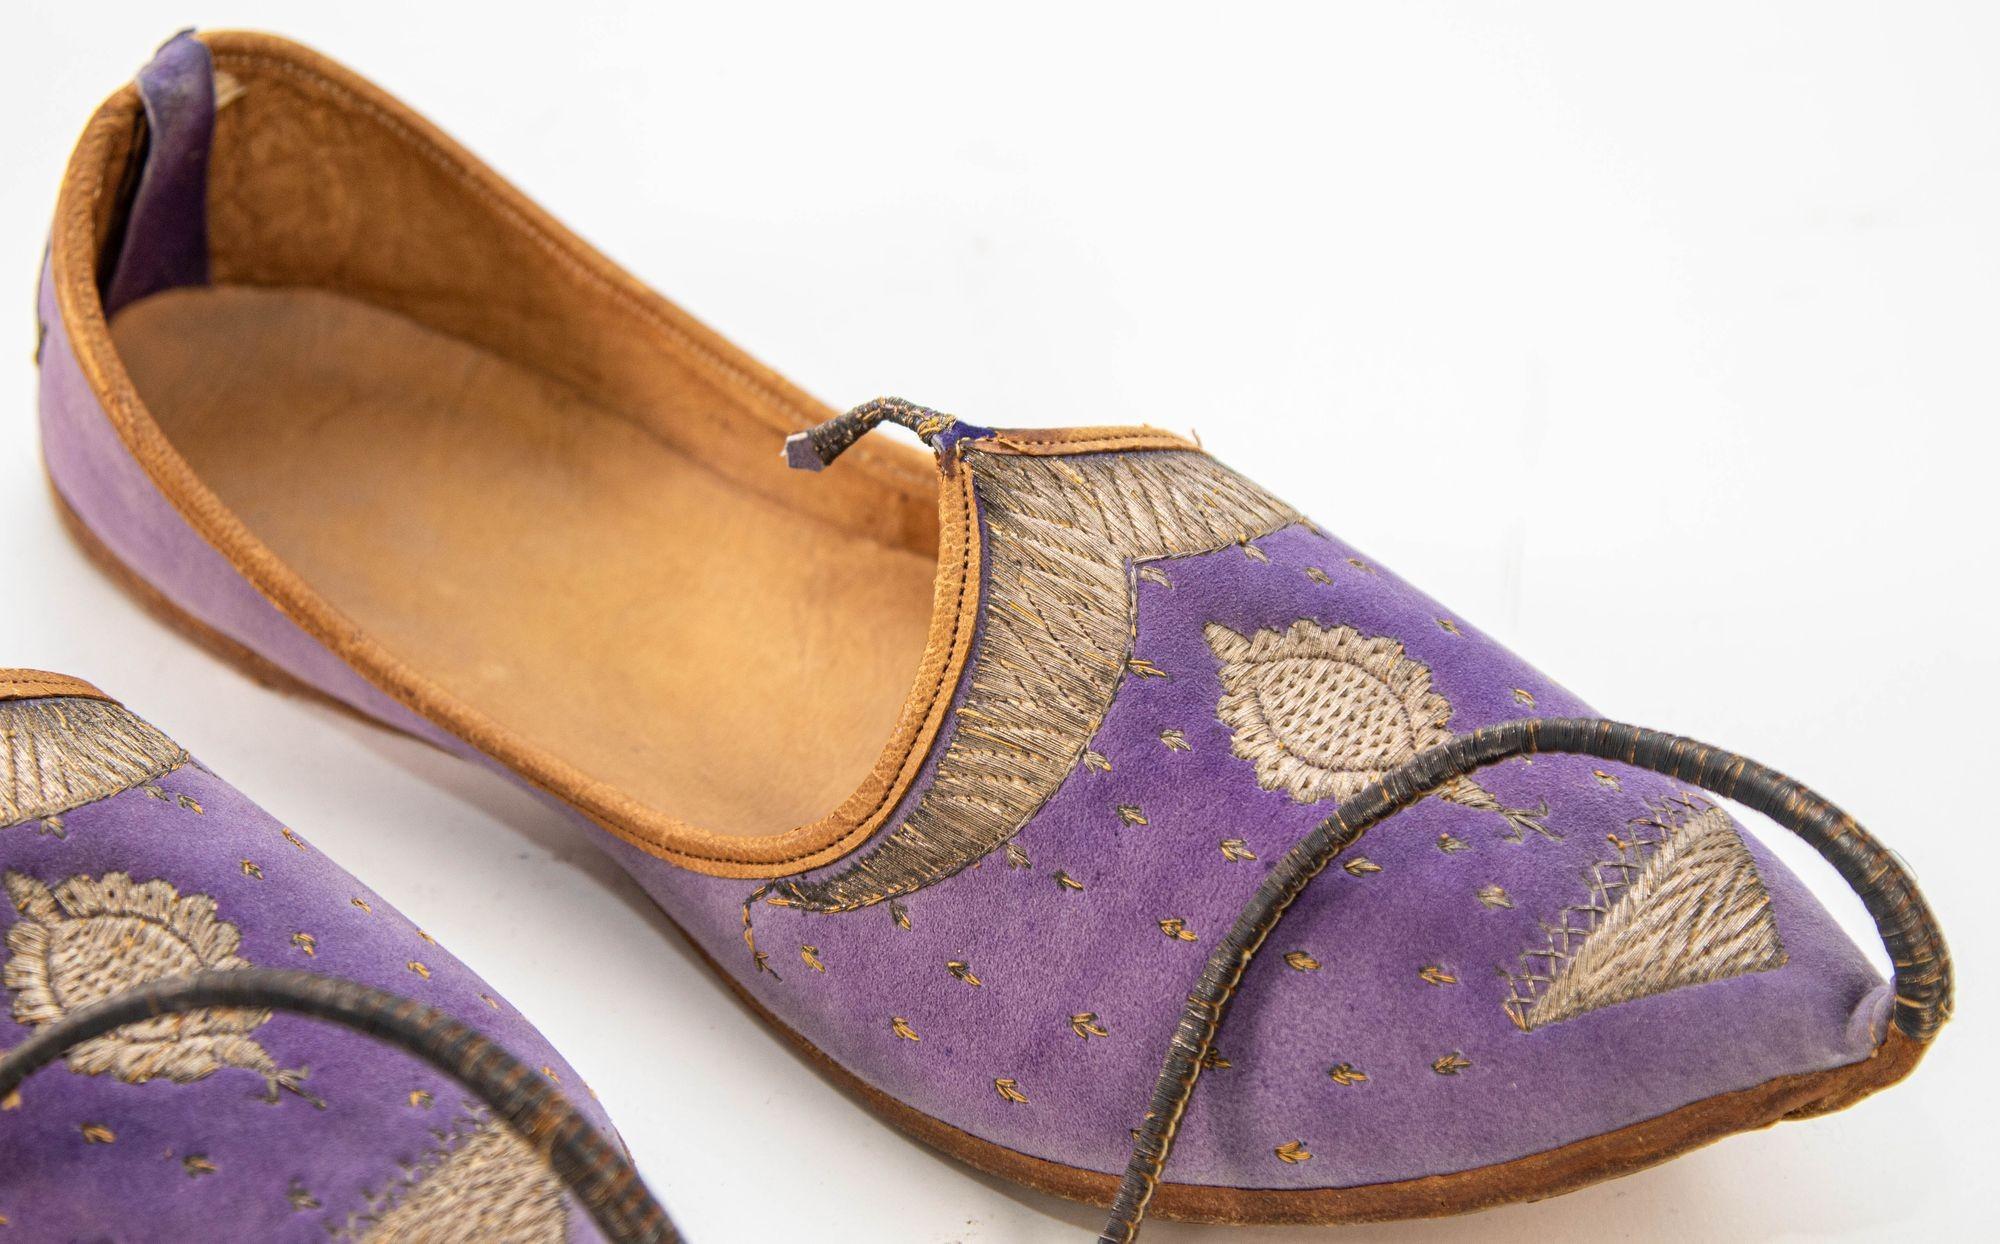 Antique Leather and purple velvet suede Mughal Moorish Turkish Shoes with Gold Embroidered.
A pair of rare late 19th century early 20th hand stitched and hand tooled leather shoes with hand embroidered with gilt metallic threads.
Measures: 11